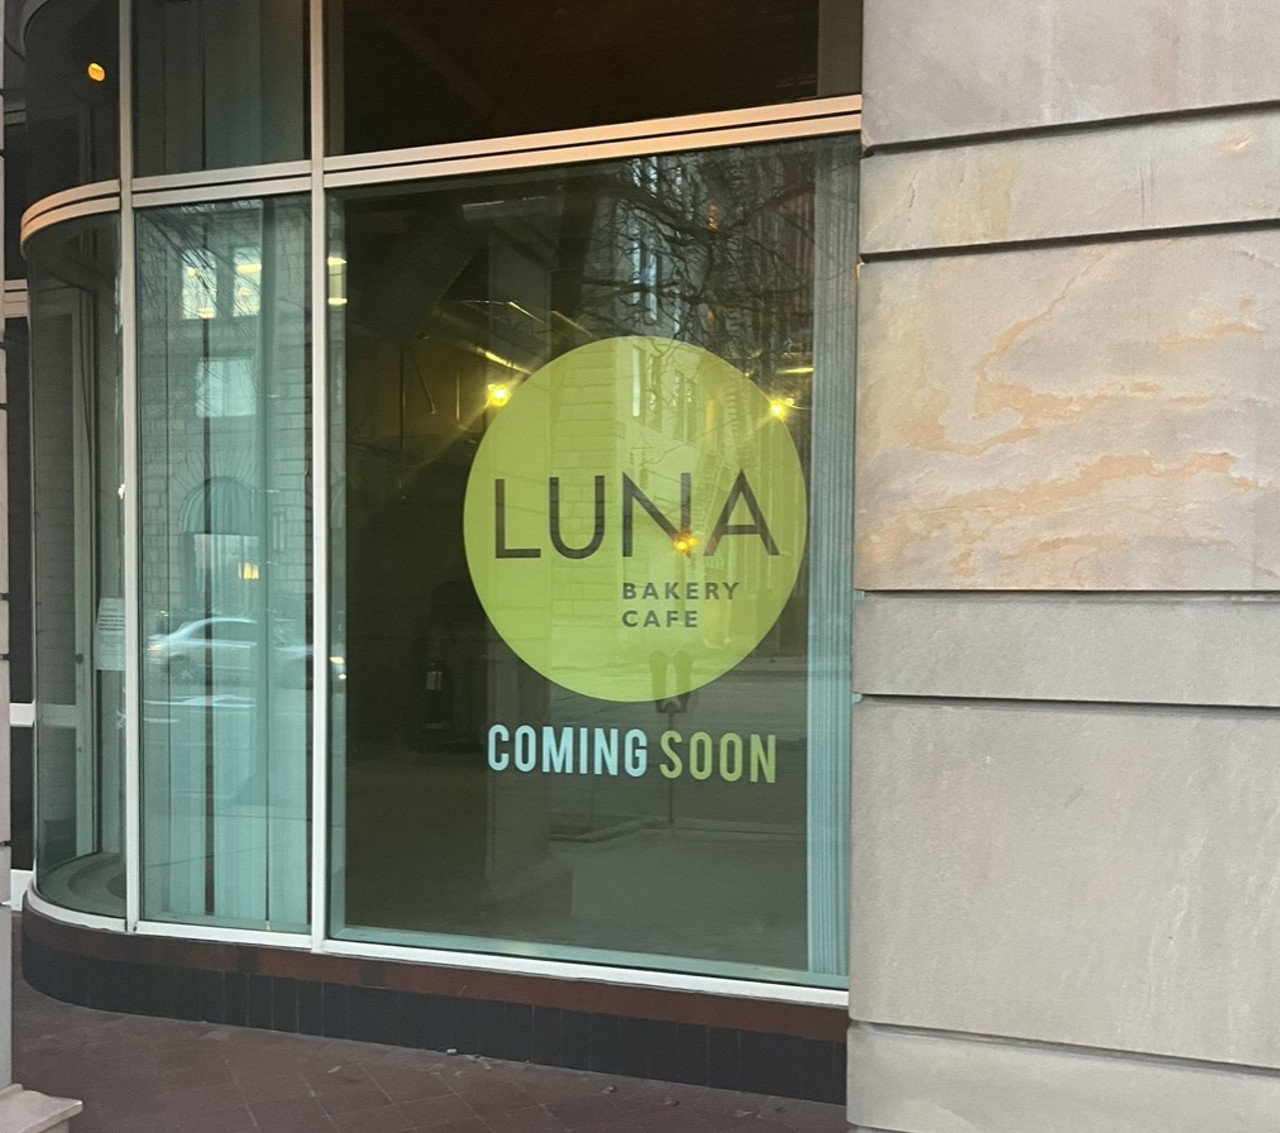 Luna Bakery and Café, with locations in Cleveland Heights and Moreland Hills, will add a downtown spot this spring. Located in the Western Reserve Building on West 9th, this latest expansion will focus on the breakfast and lunch crowds.